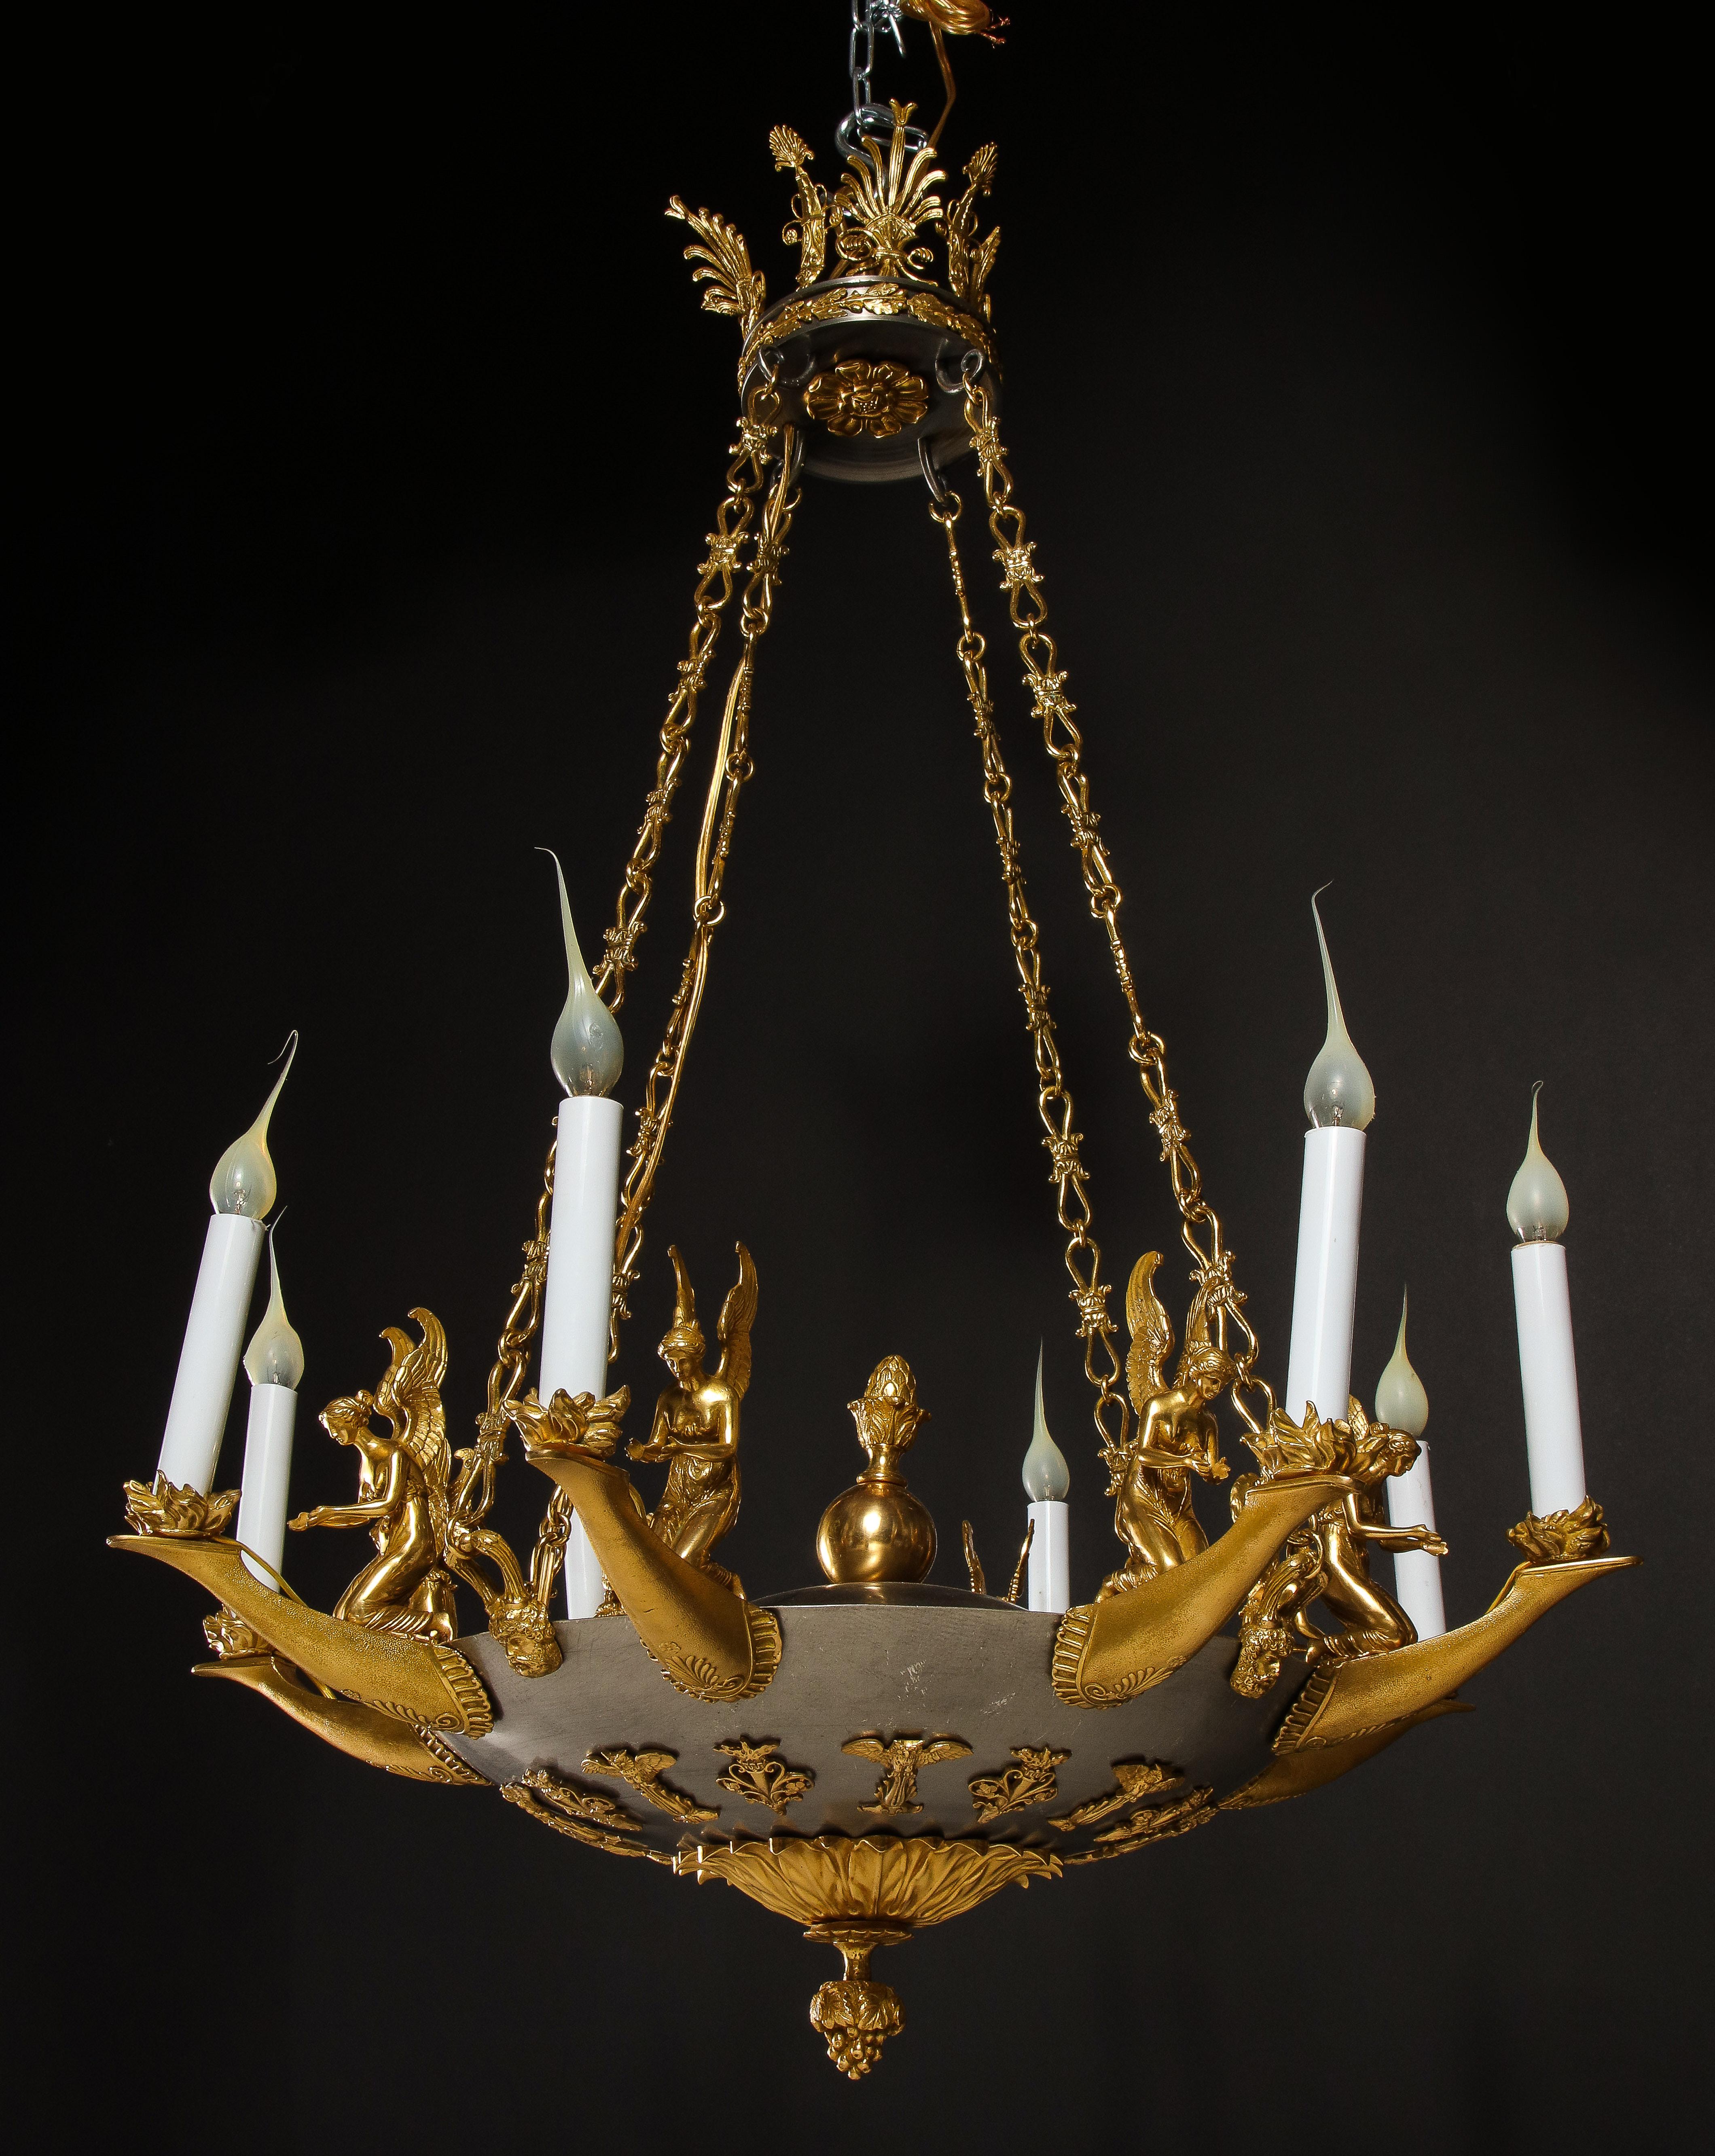 A fine and unique Antique French Empire style gilt bronze and steel multi light figural chandelier of great detail embellished with gilt bronze Neoclassical kneeling figures of women depicting flames which represent light. This fine chandelier is